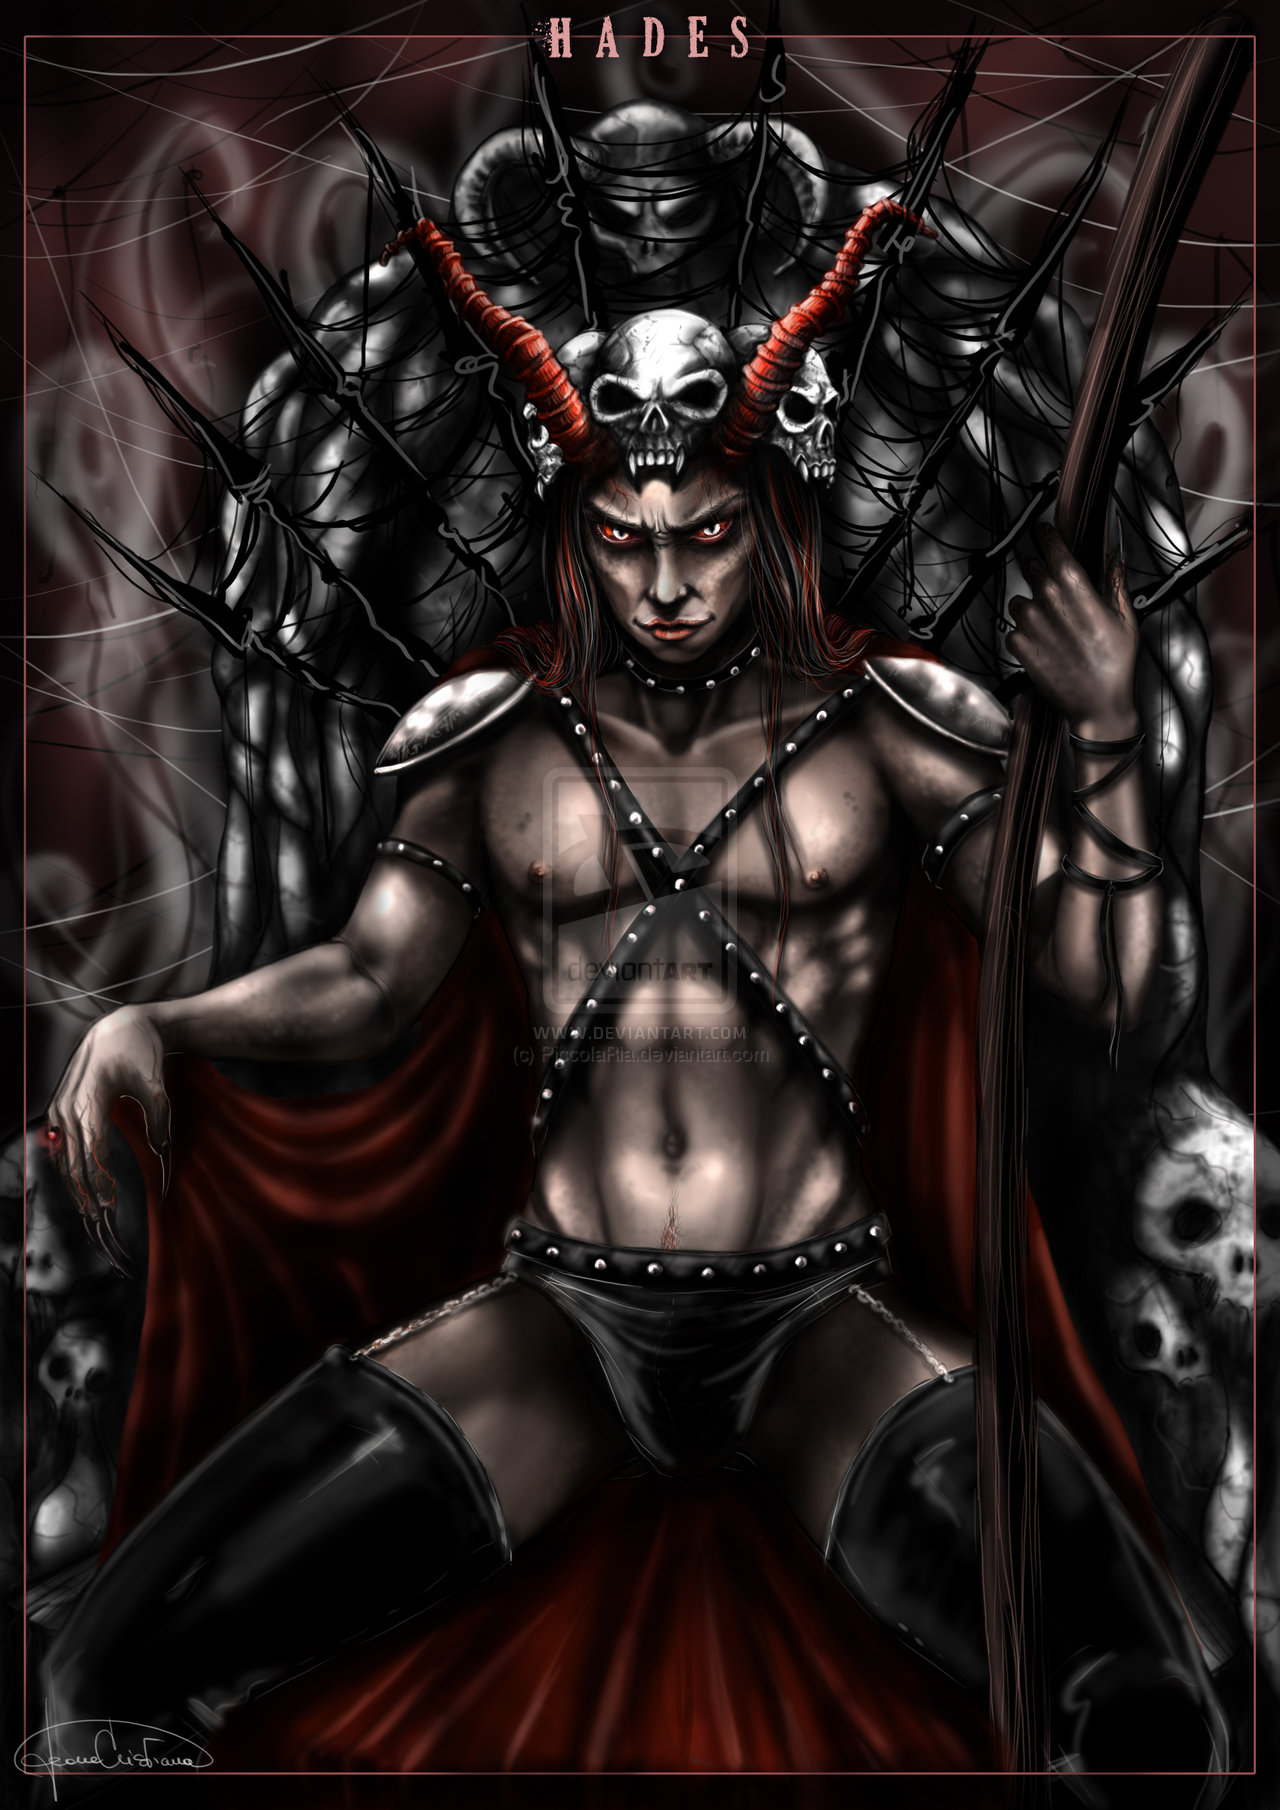 Awesome Hades Artwork And Wallpaper 1dut